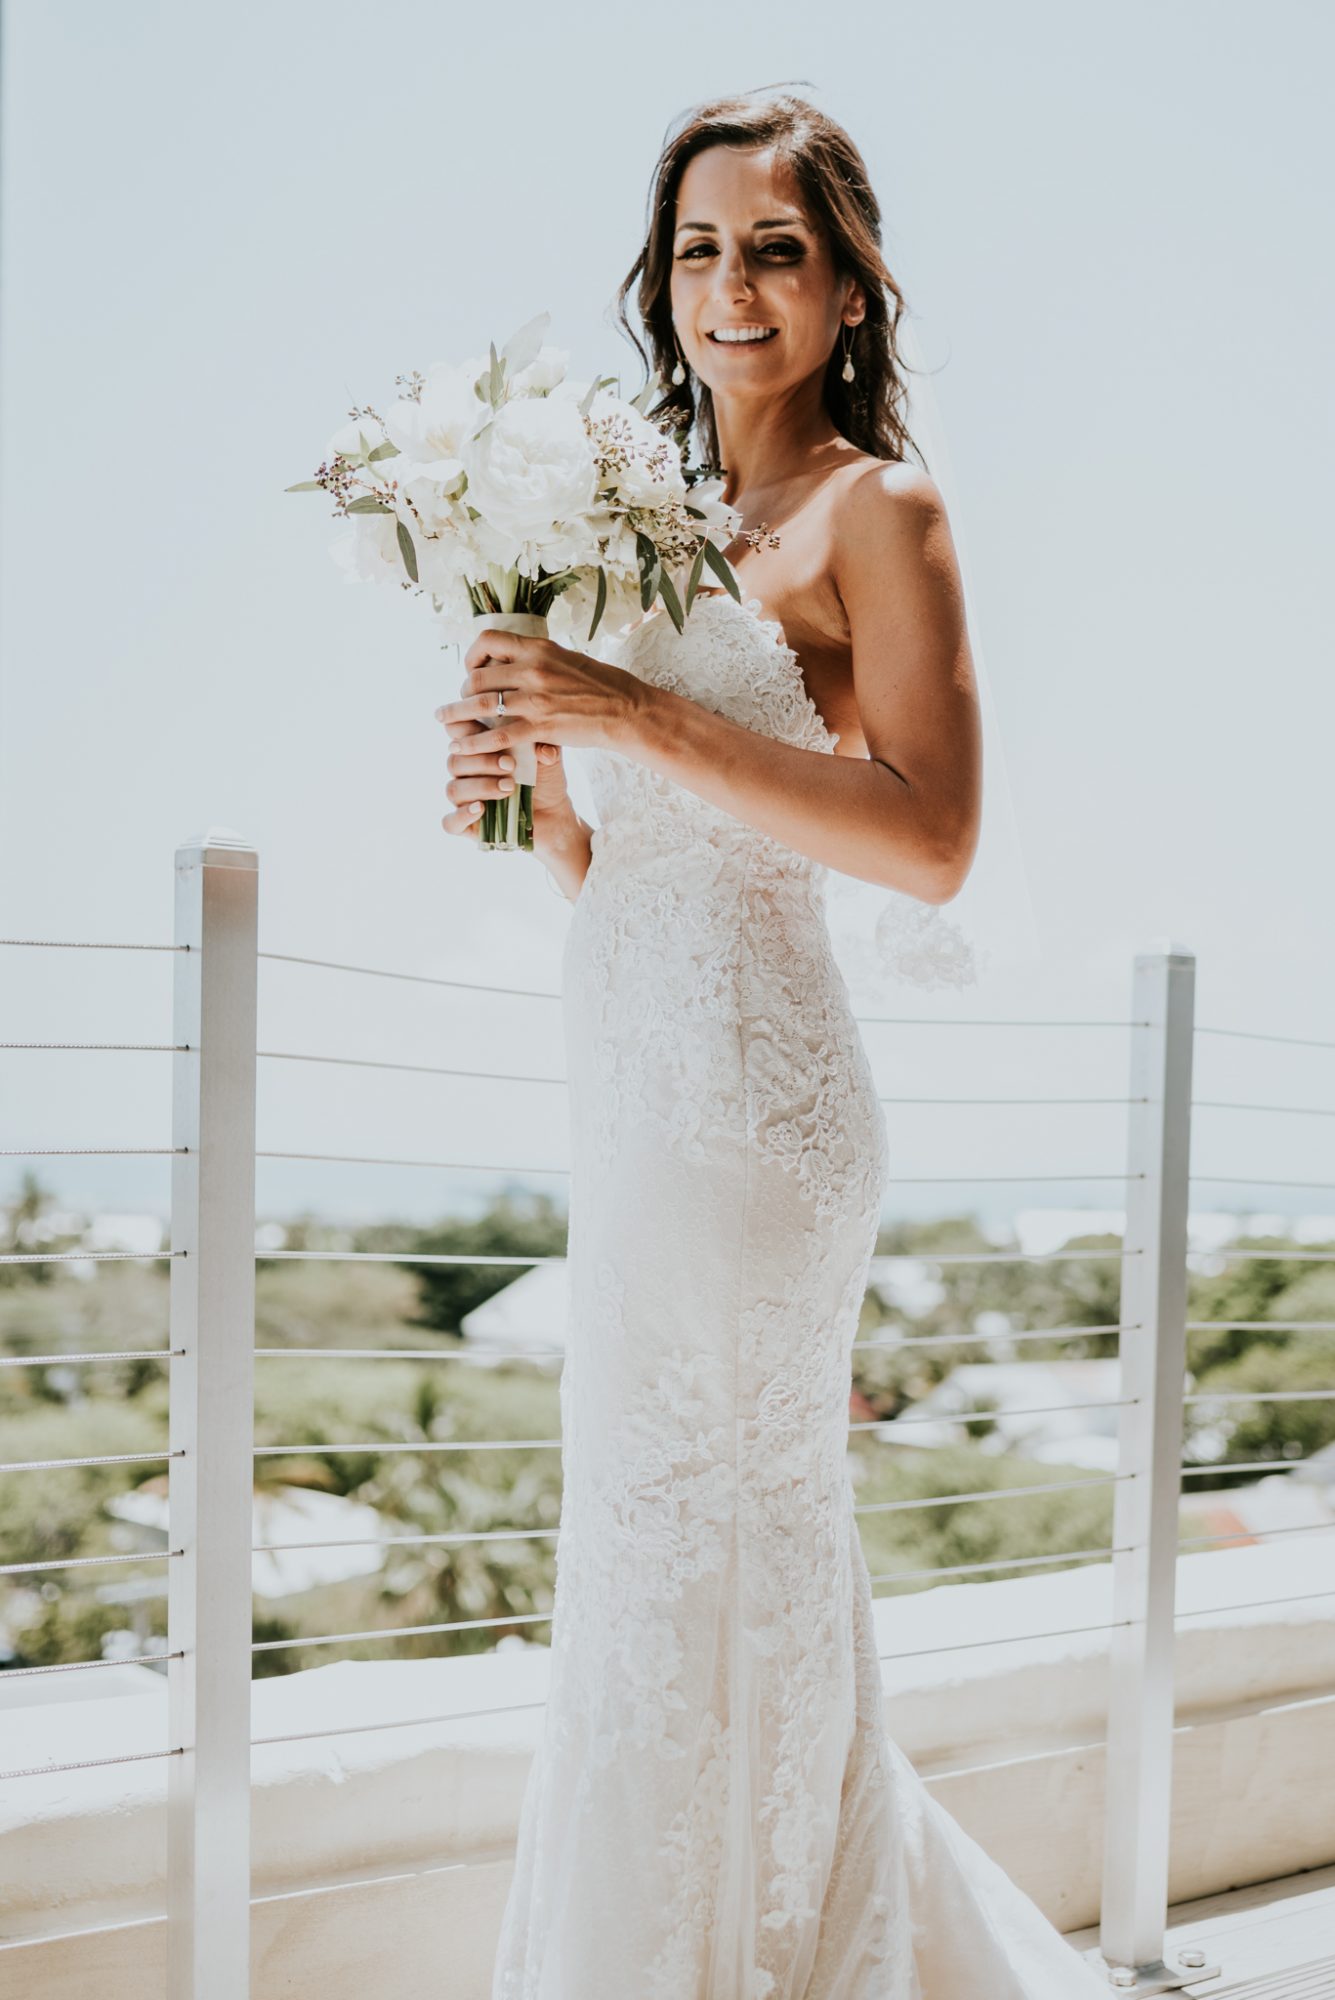 A bride in a white wedding dress standing on a rooftop balcony overlooking the ocean, captured by Key West Wedding Photographer.